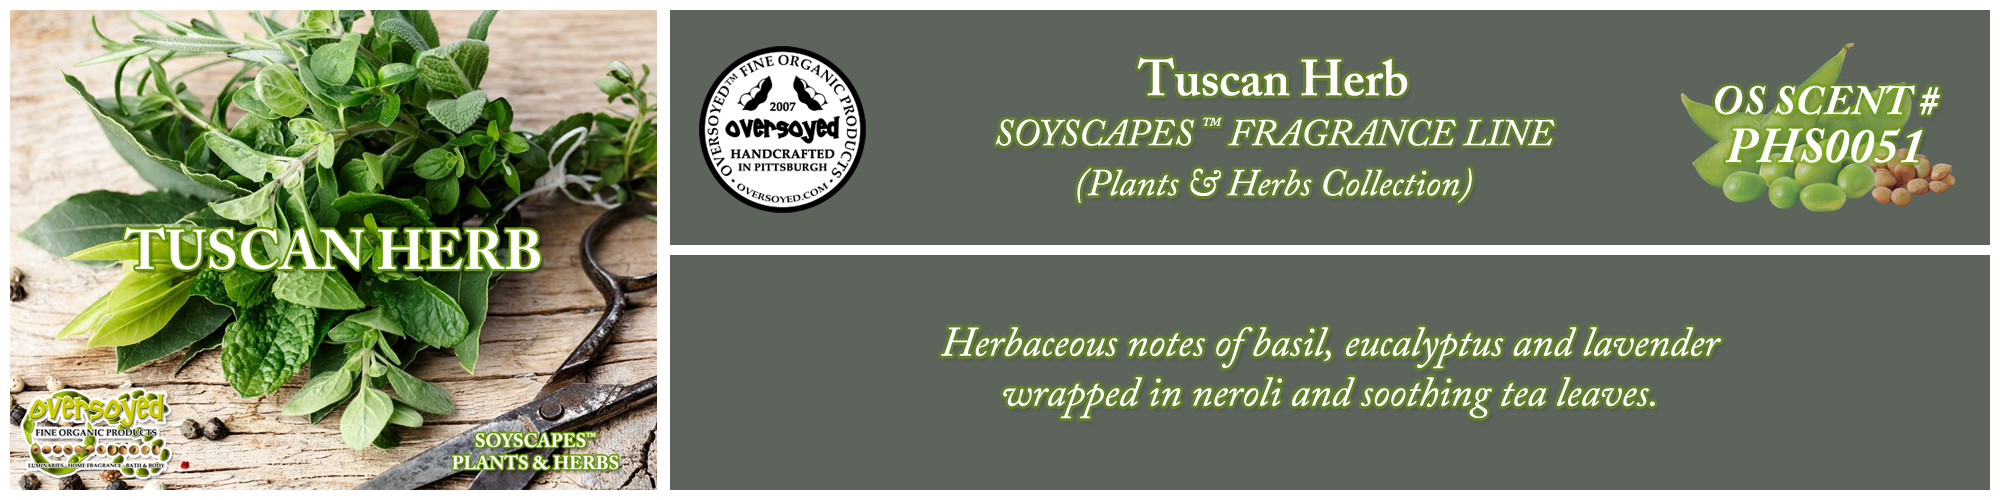 Tuscan Herb Handcrafted Products Collection